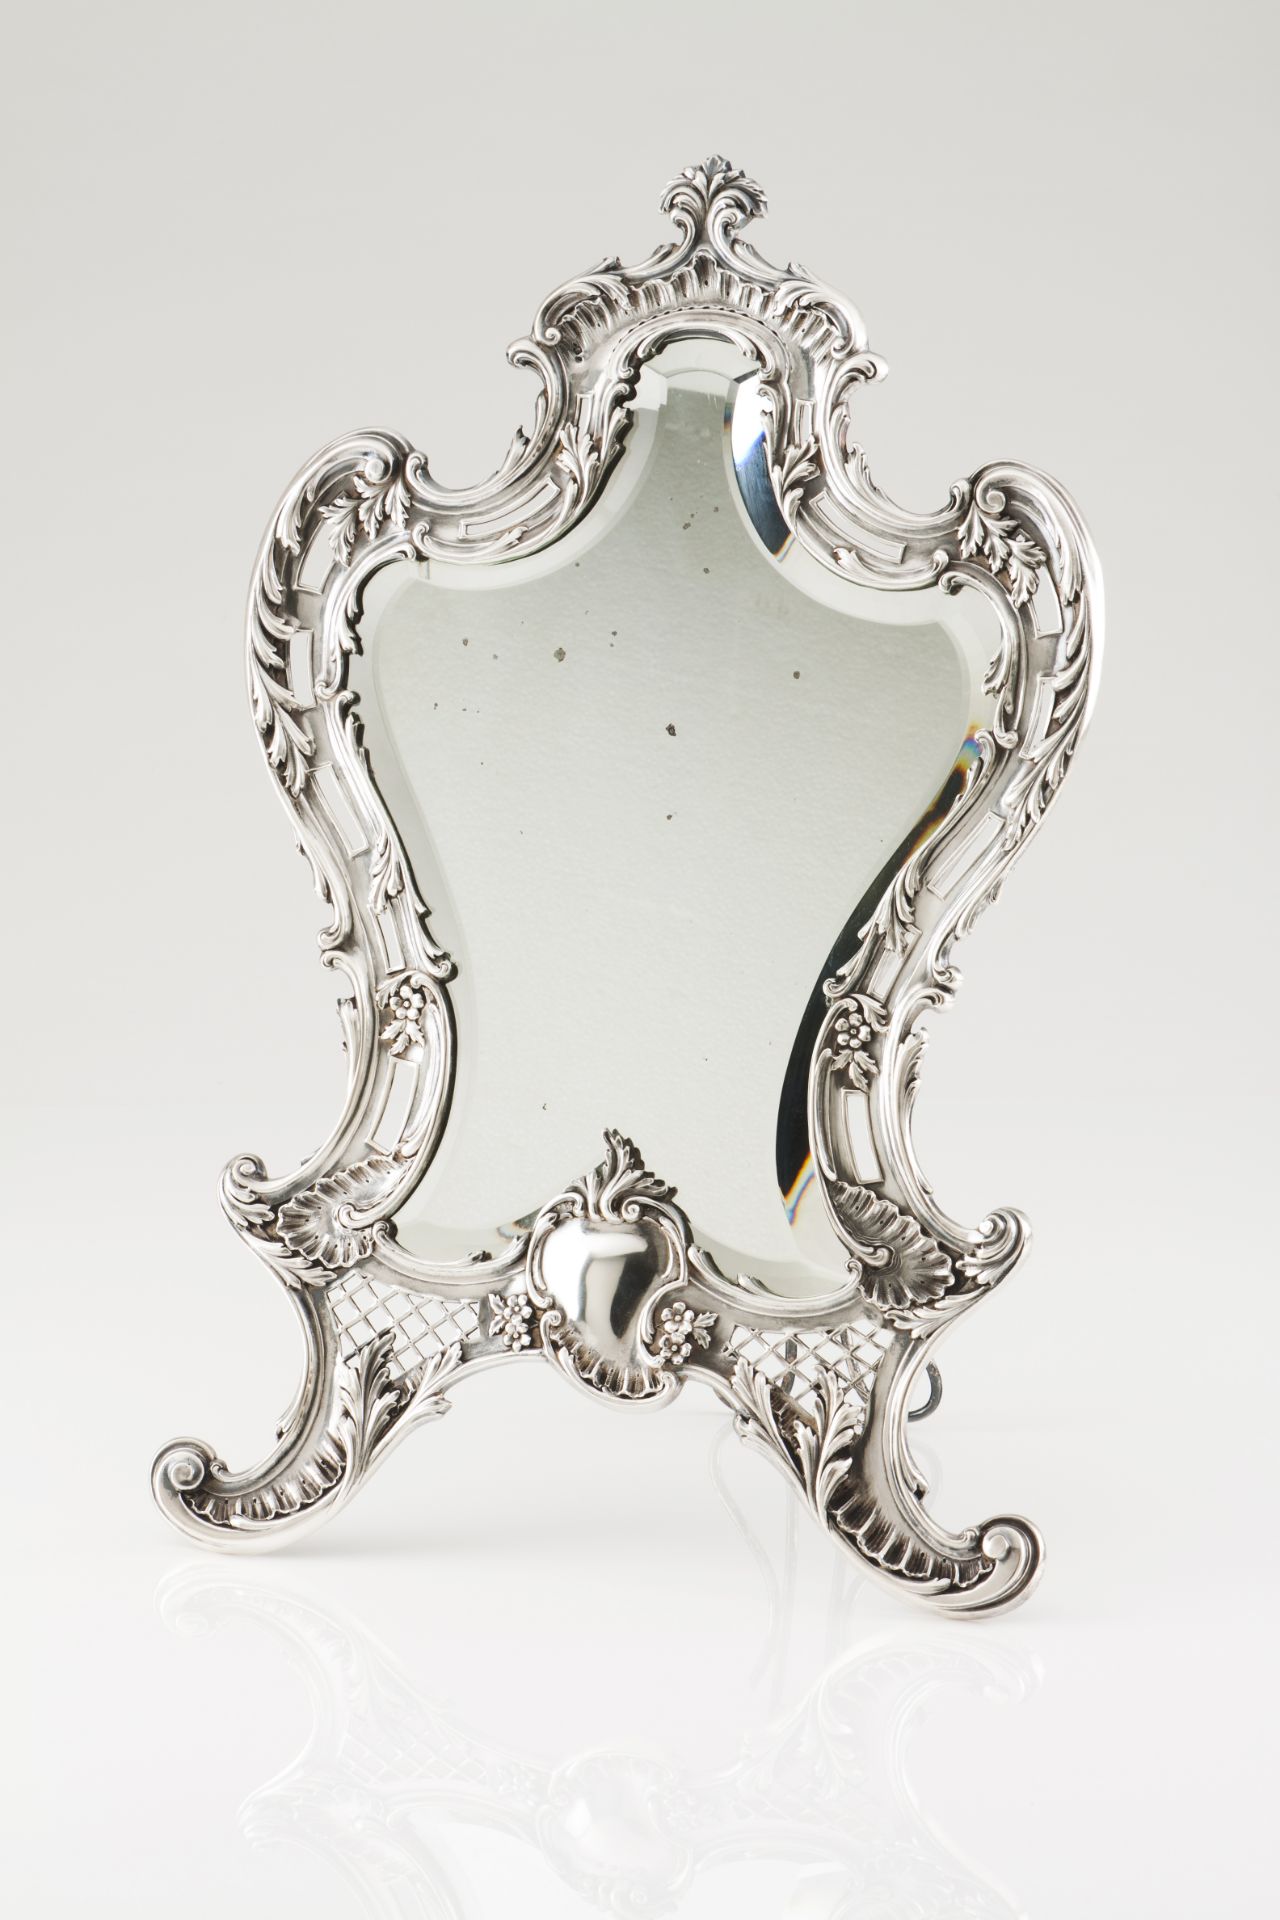 A table mirrorPortuguese silverRomantic period decoration of pierced and raised floral and foliage